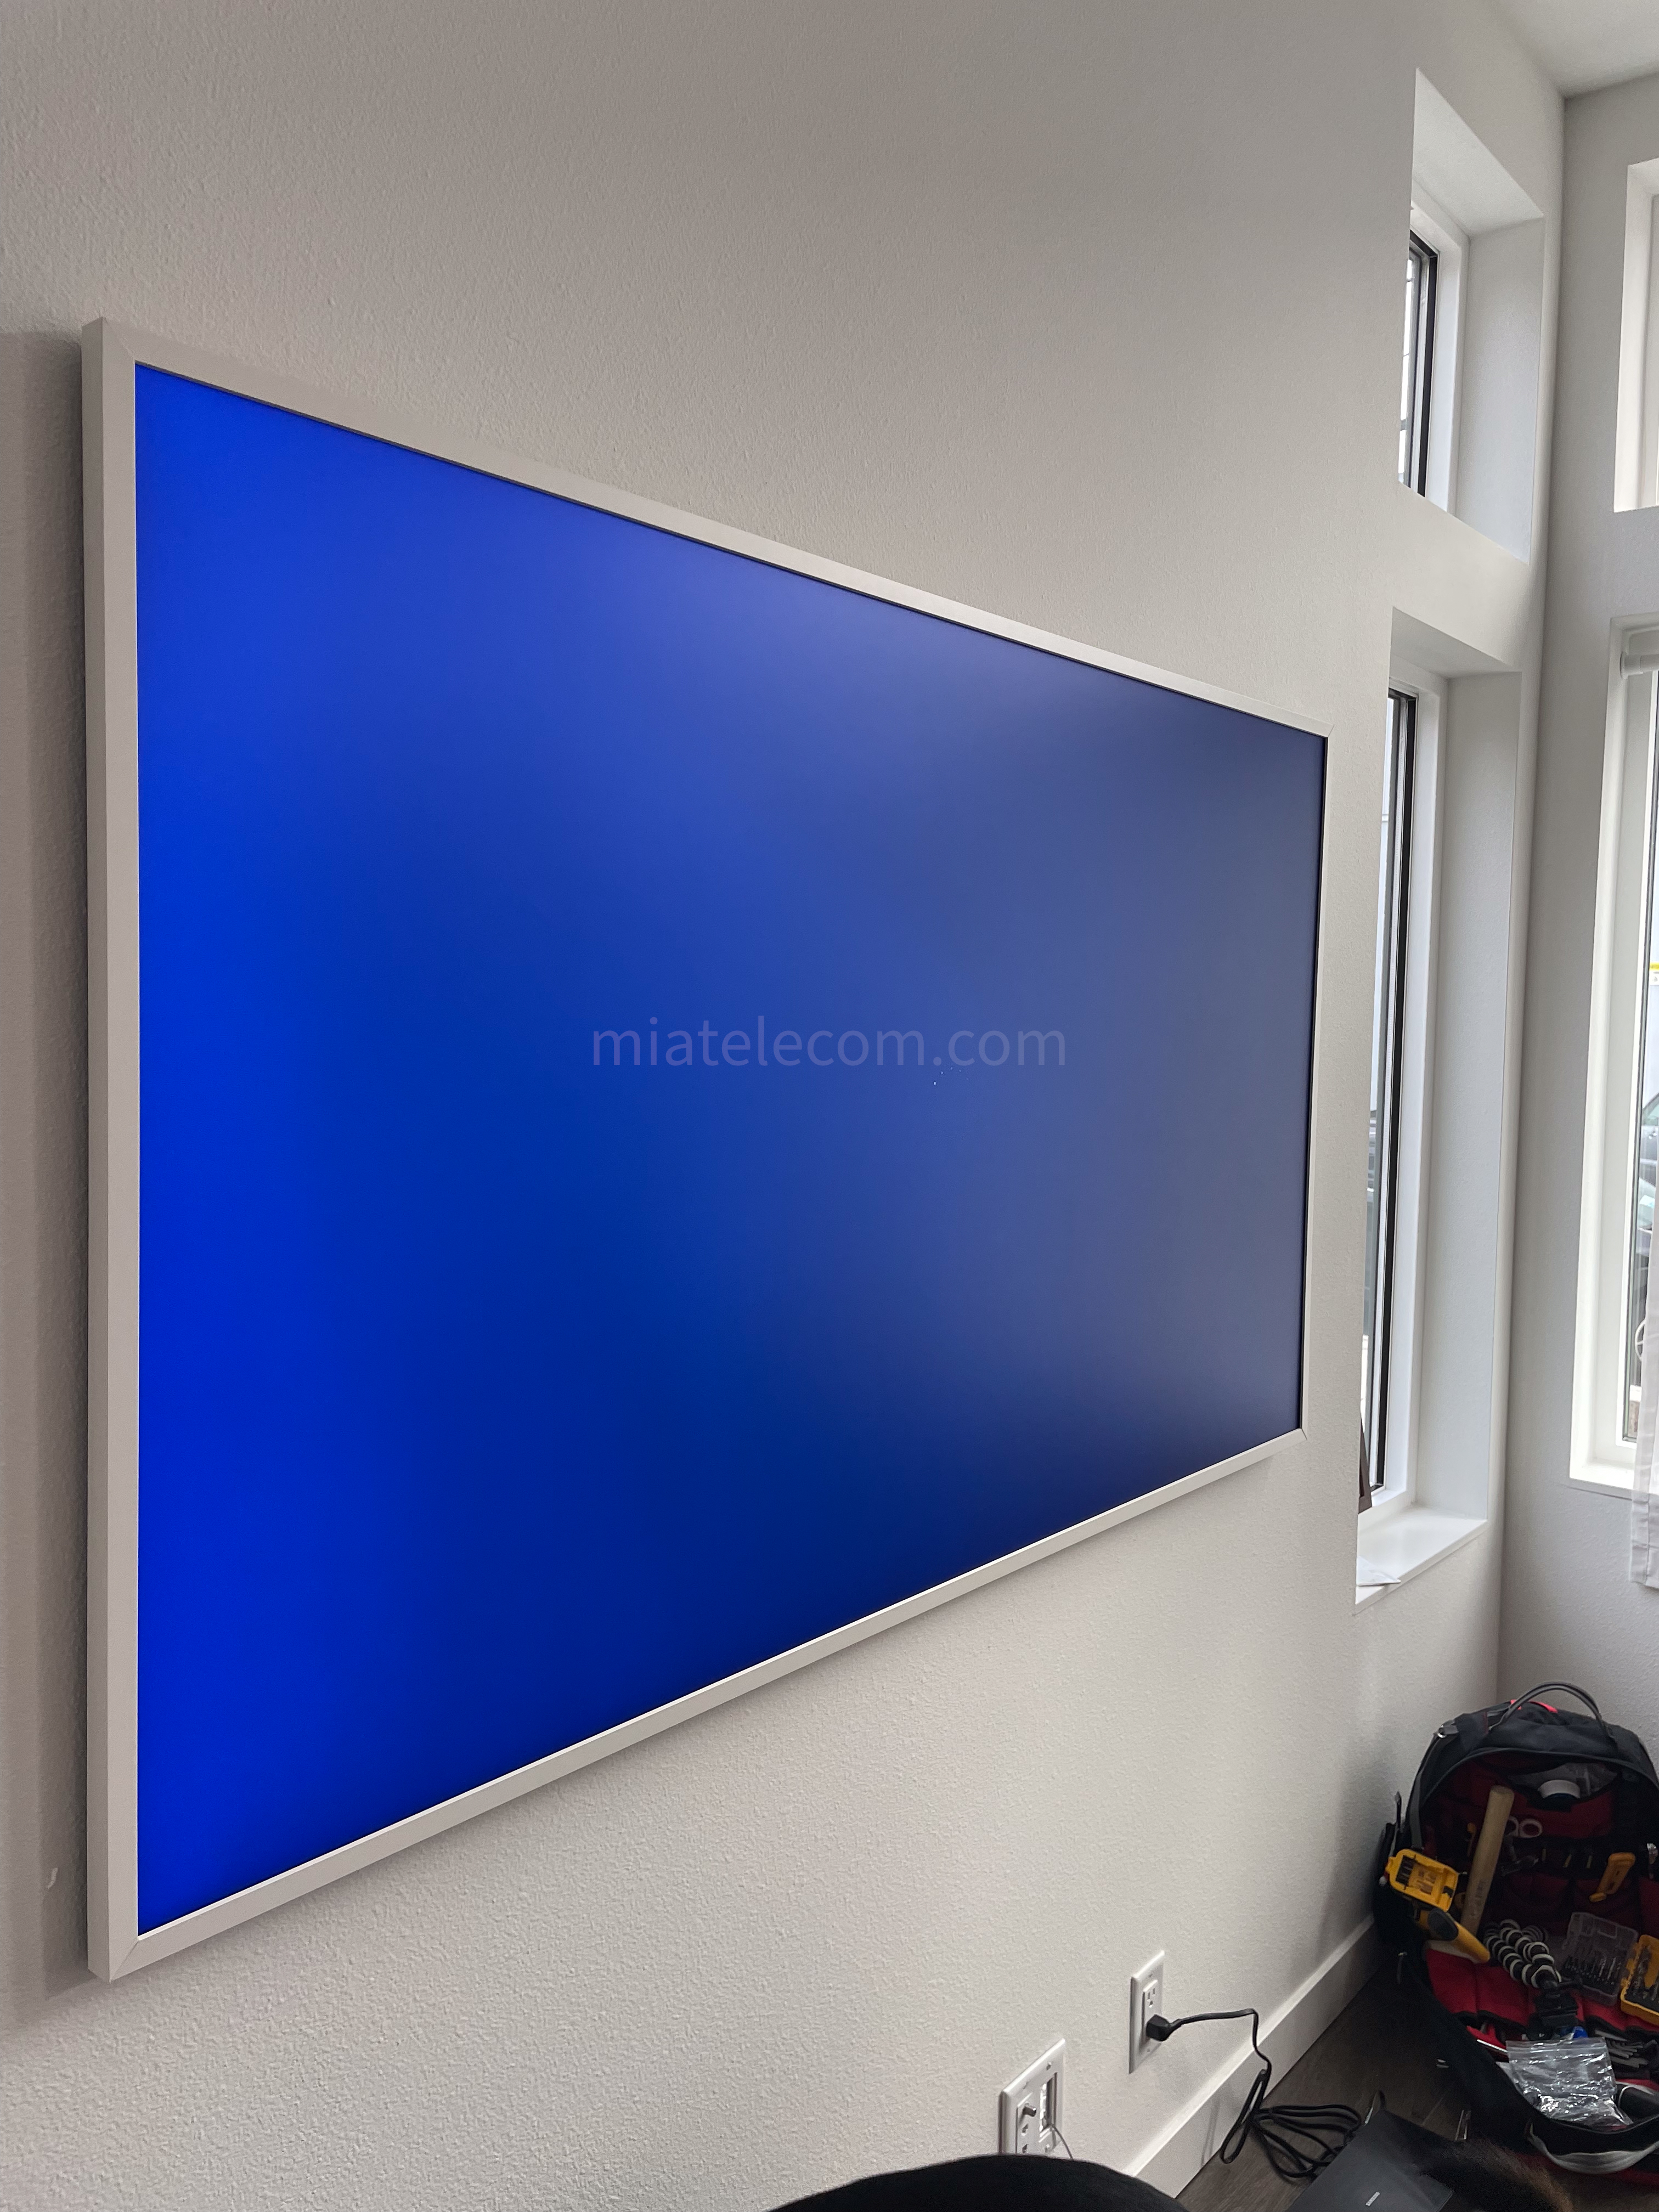 75'' w/ White Frame and Cord Management